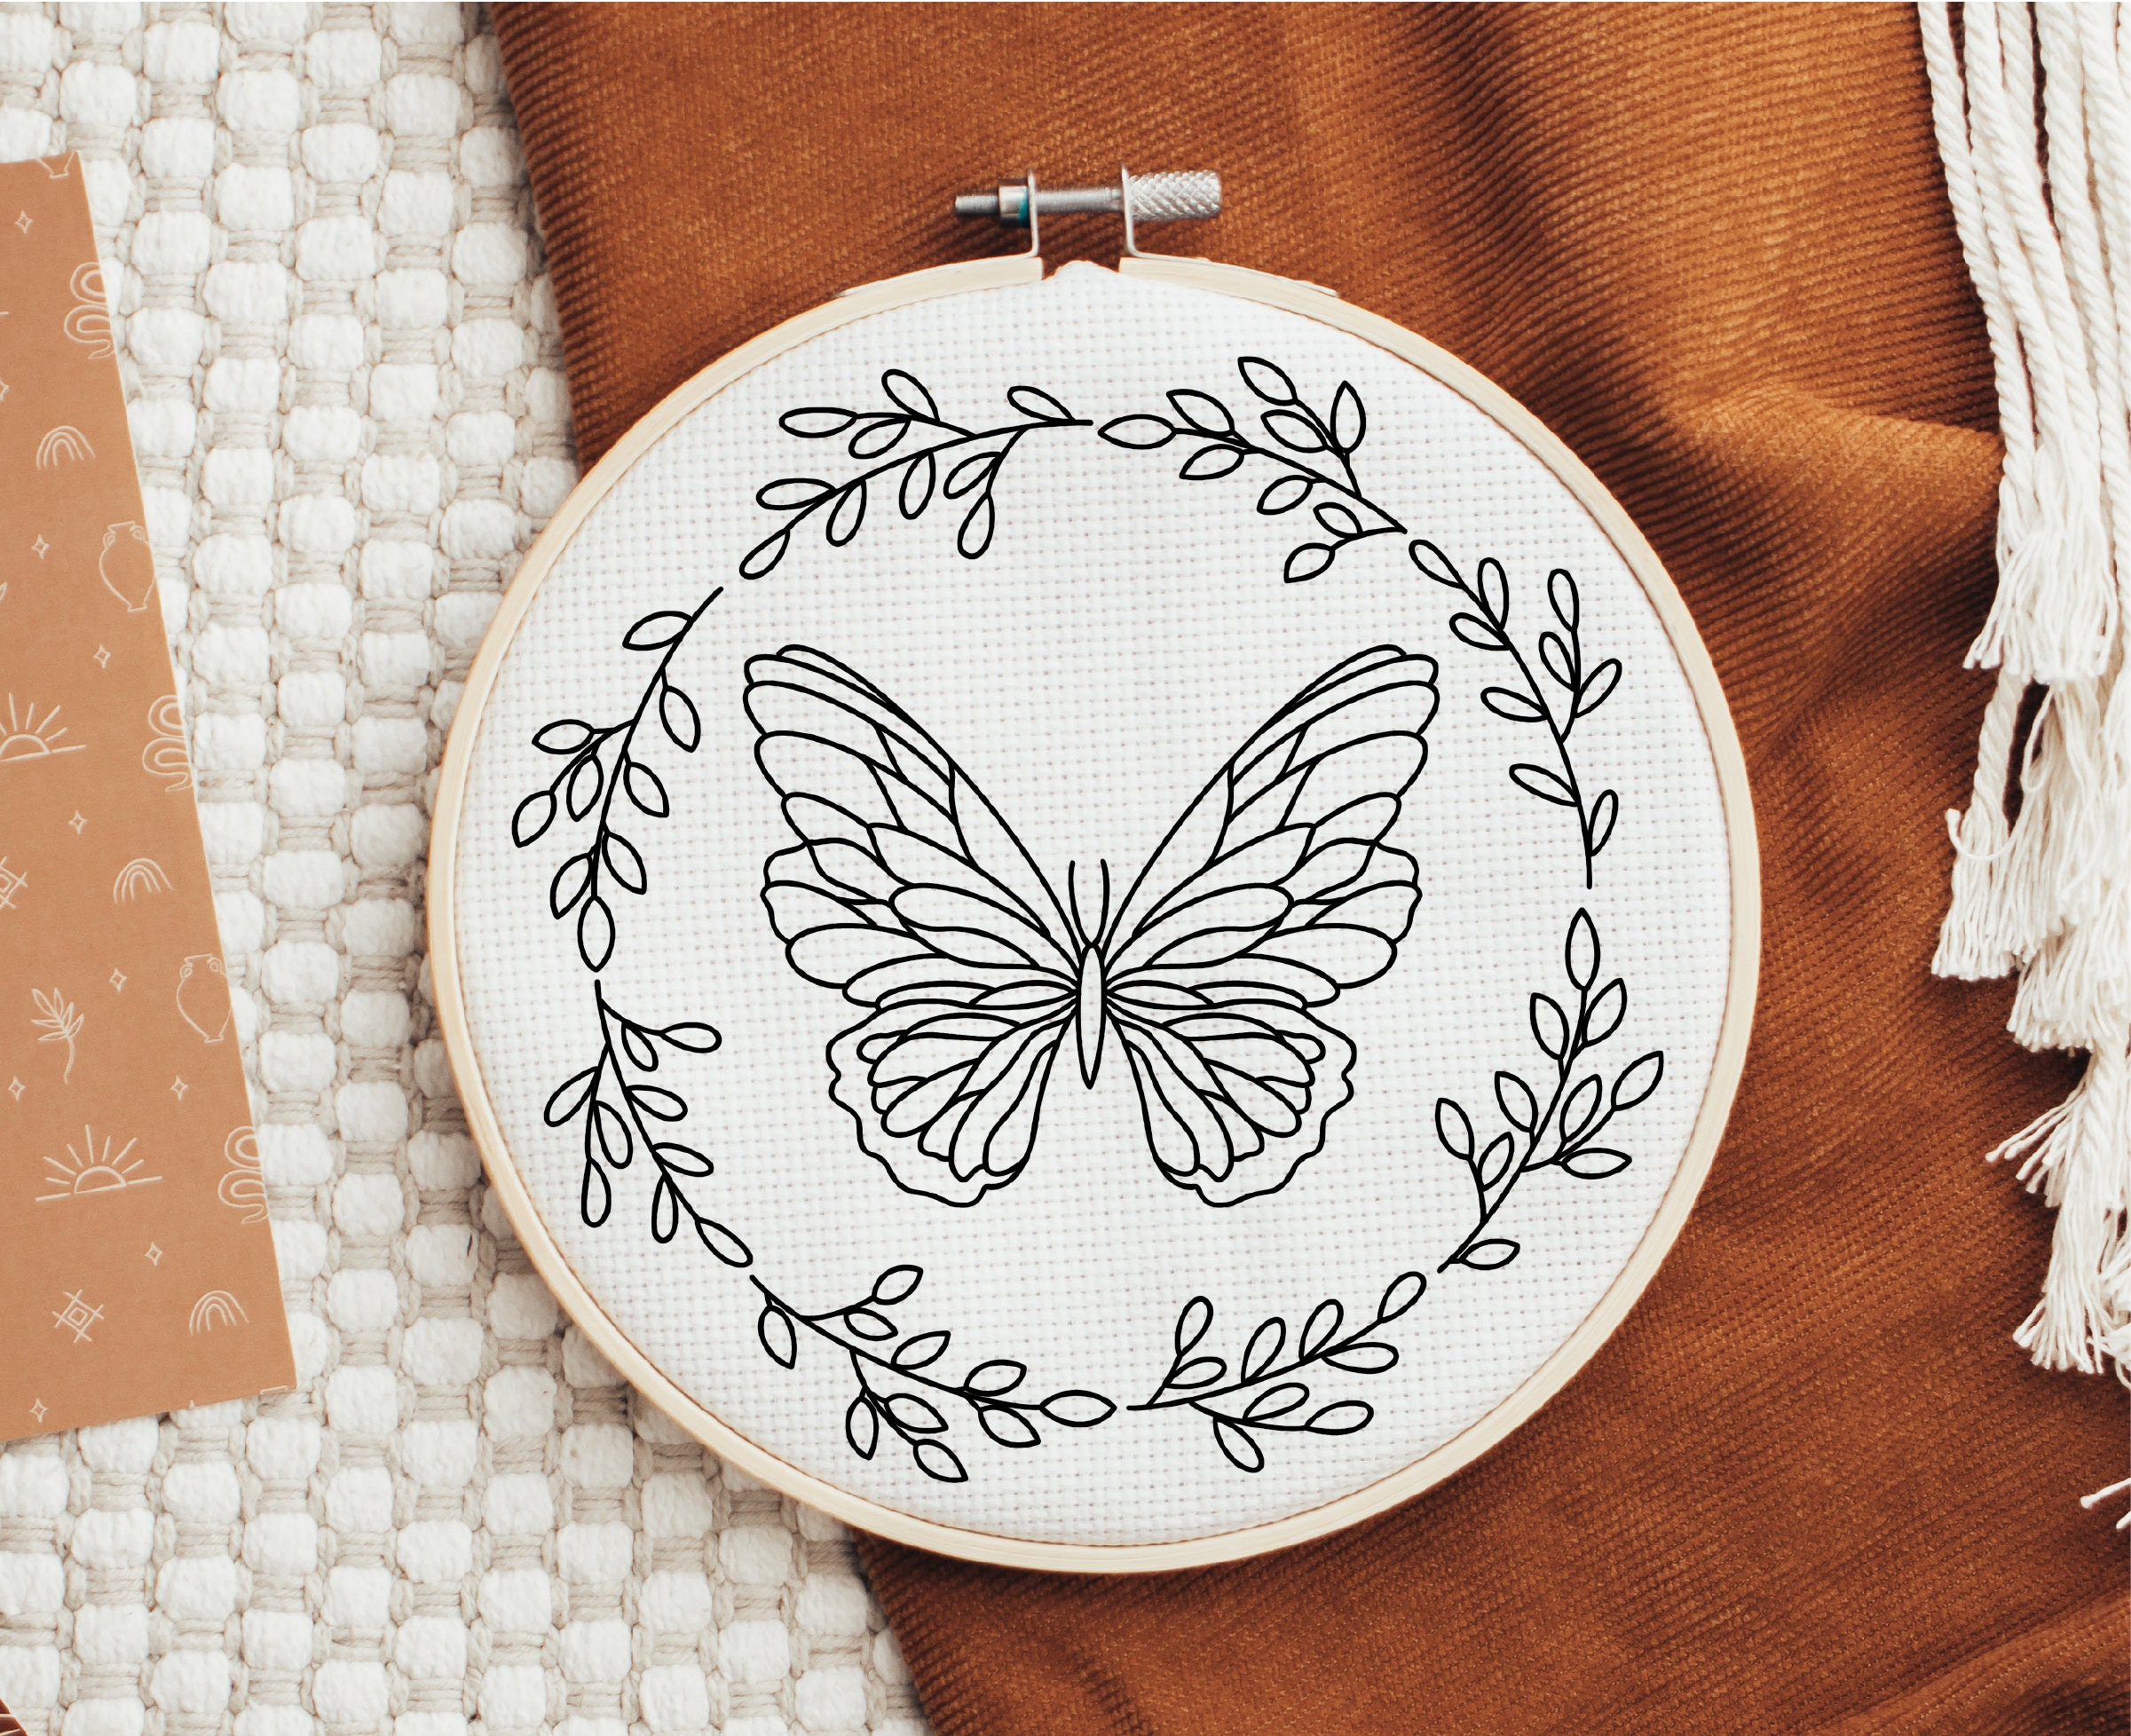 Embroidery Kit Personalized Bag Vase Butterfly Stamped Embroidery